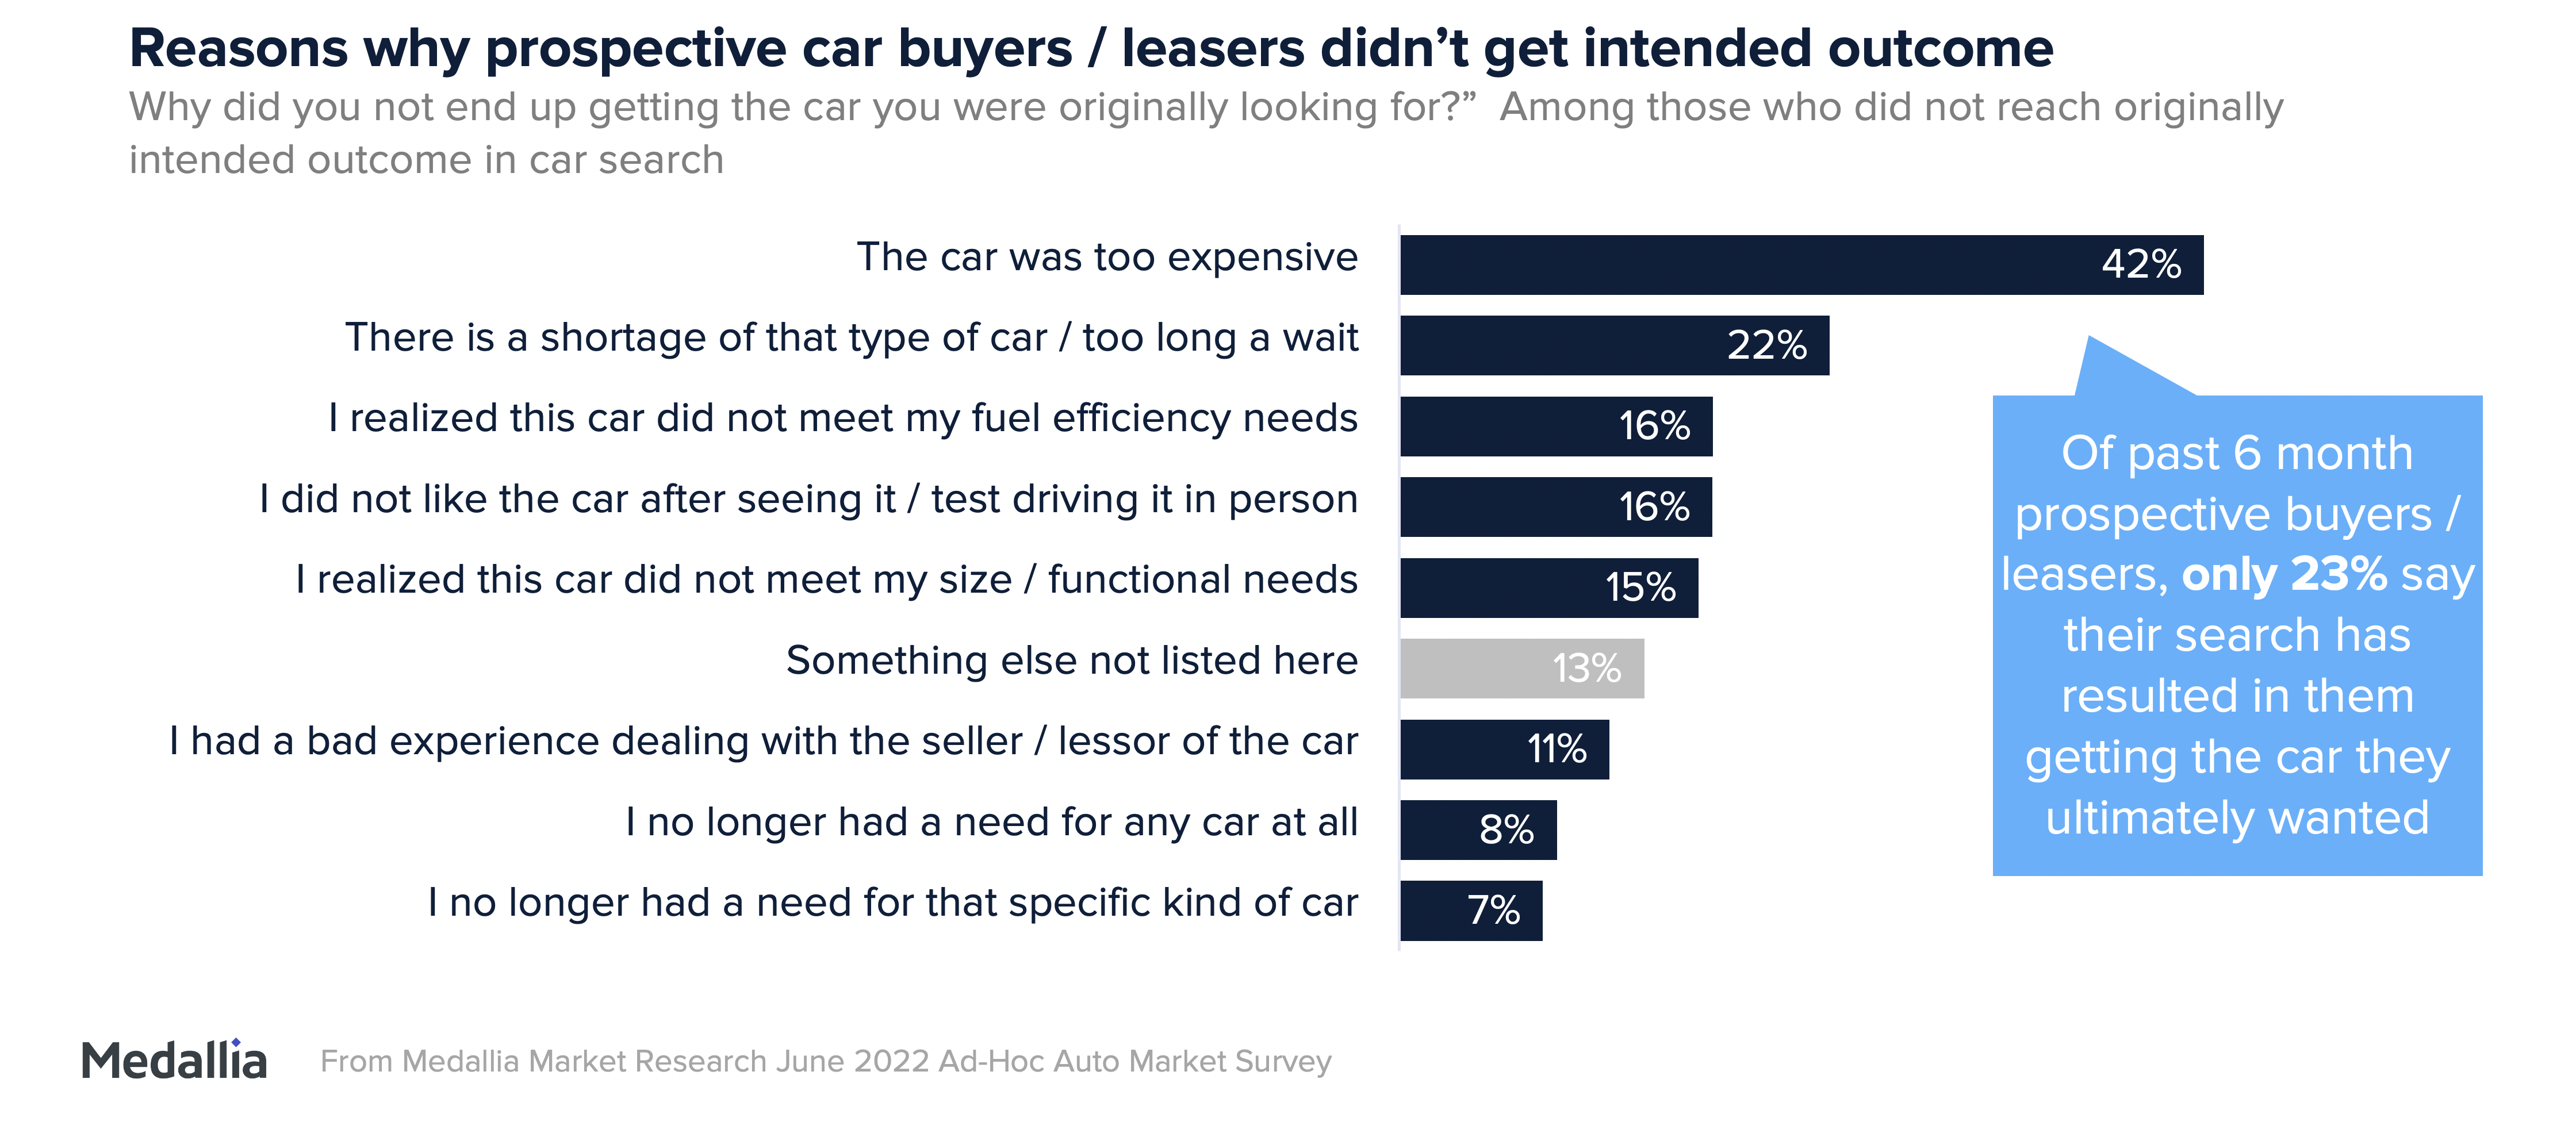 Reasons why prospective car buyers or leasers didn’t get intended outcome. 42% report the car was too expensive, followed by 22% reporting too long of a wait.